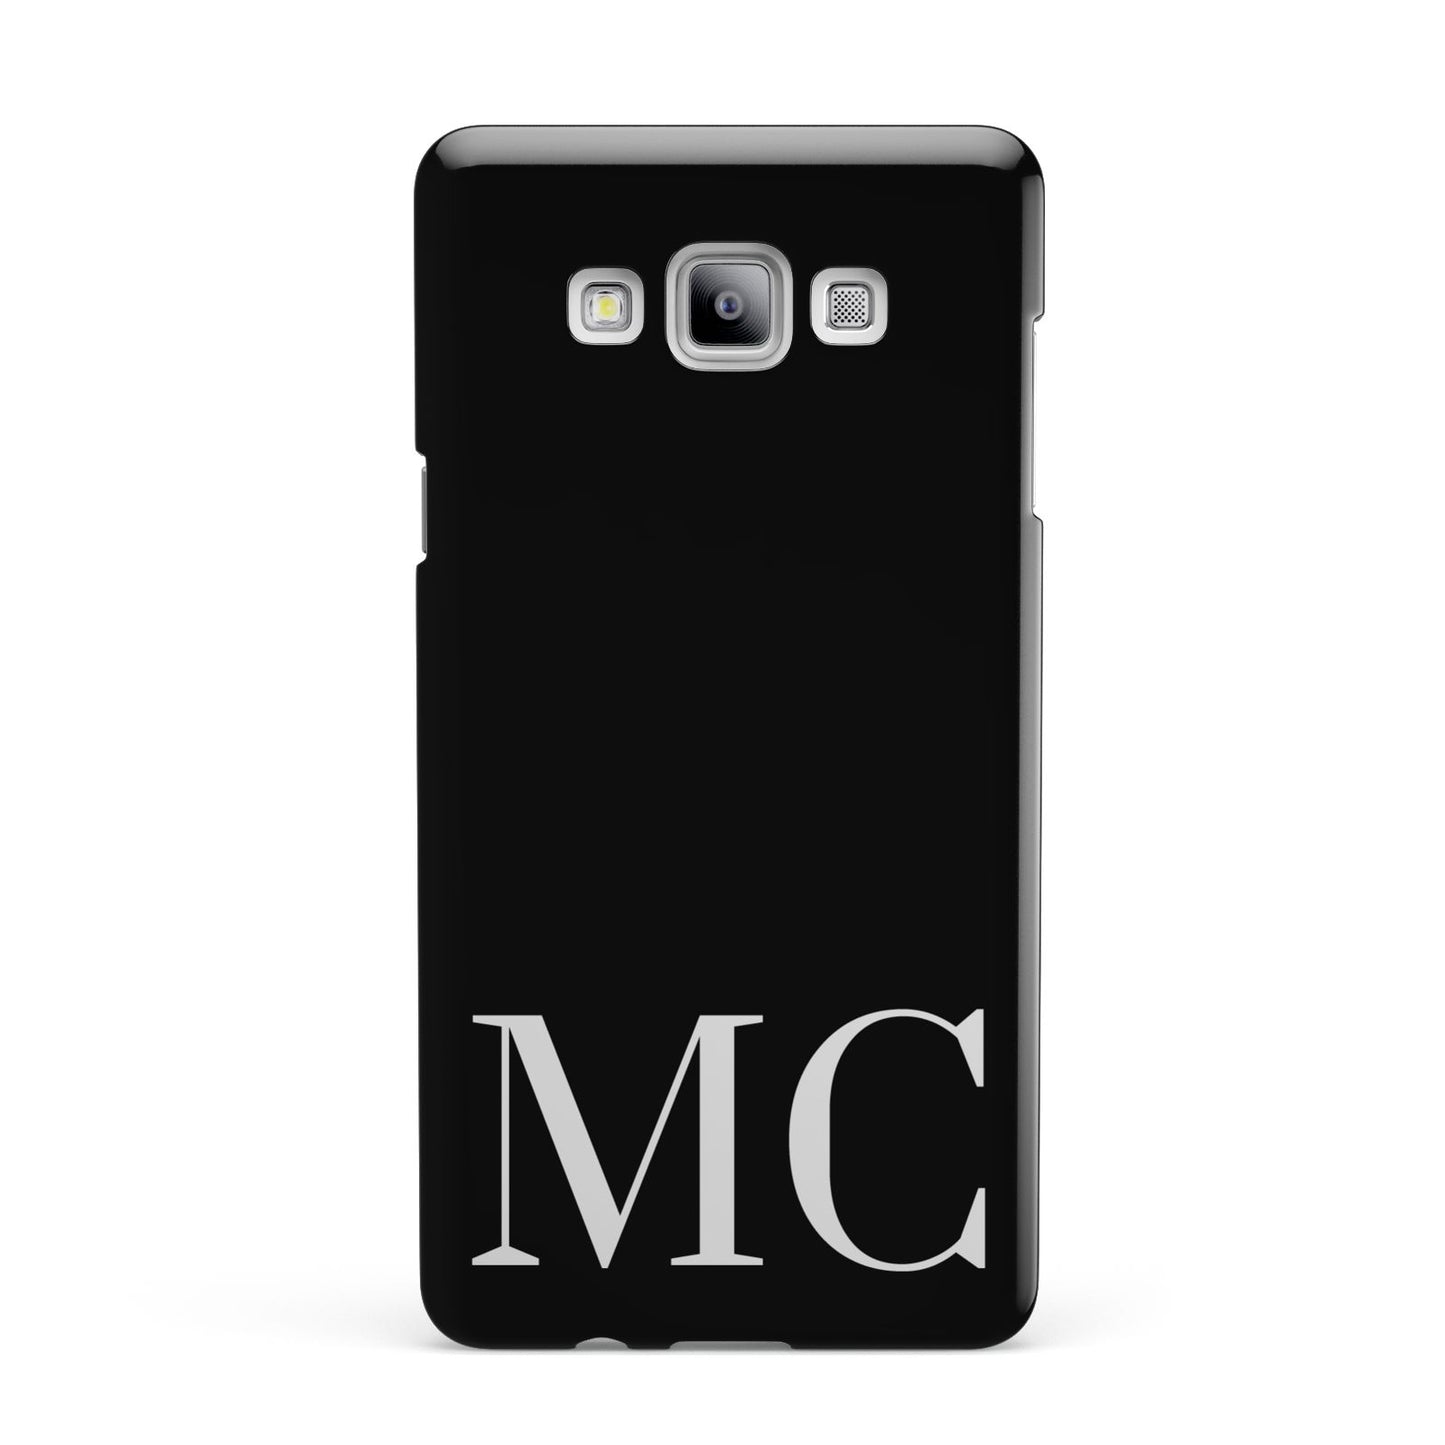 Initials Personalised 1 Samsung Galaxy A7 2015 Case